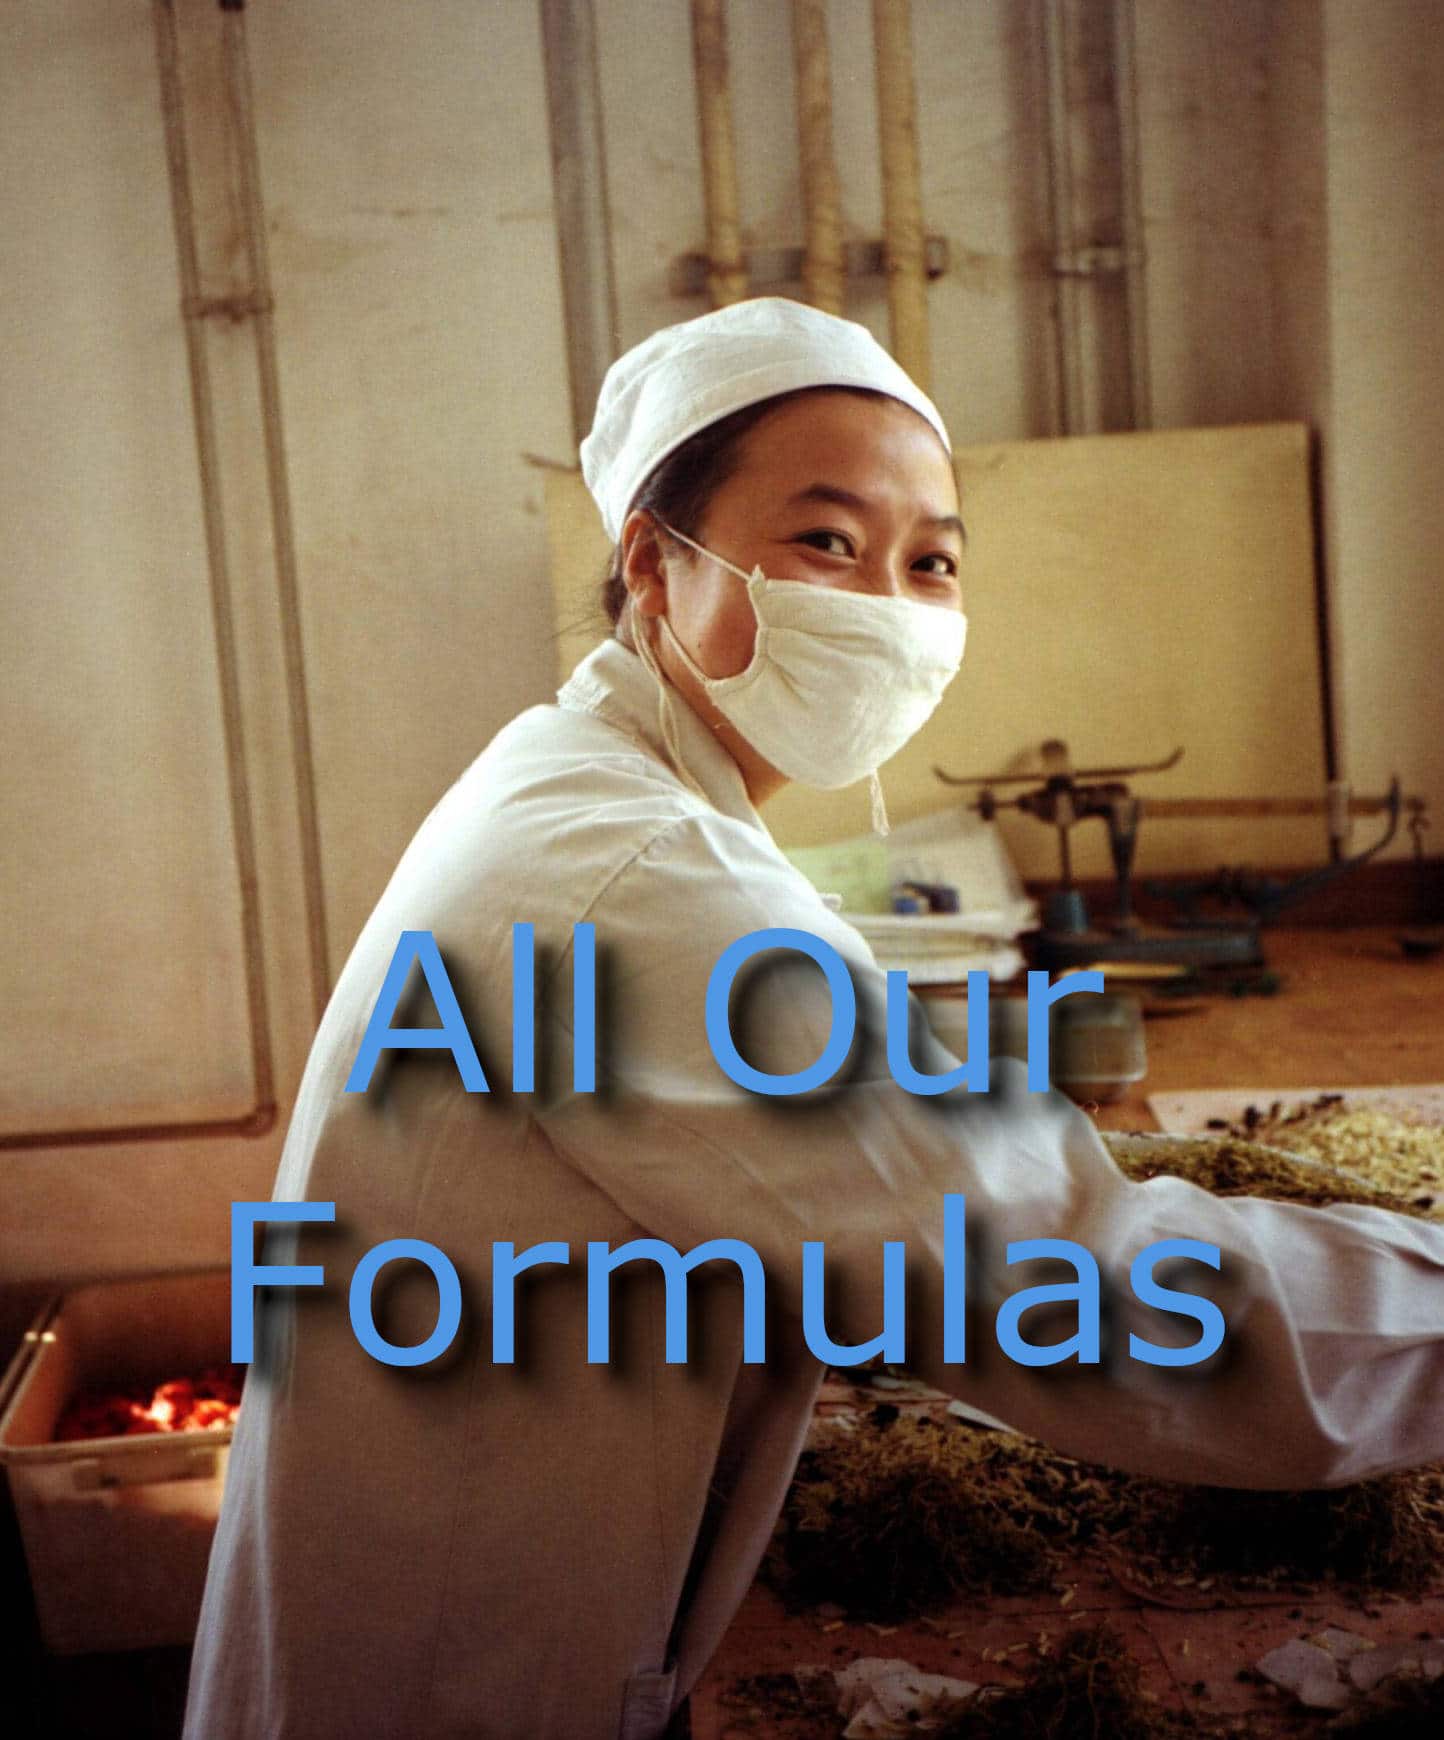 PICTURE OF A WOMAN WITH A LINK to another page of all our formulas